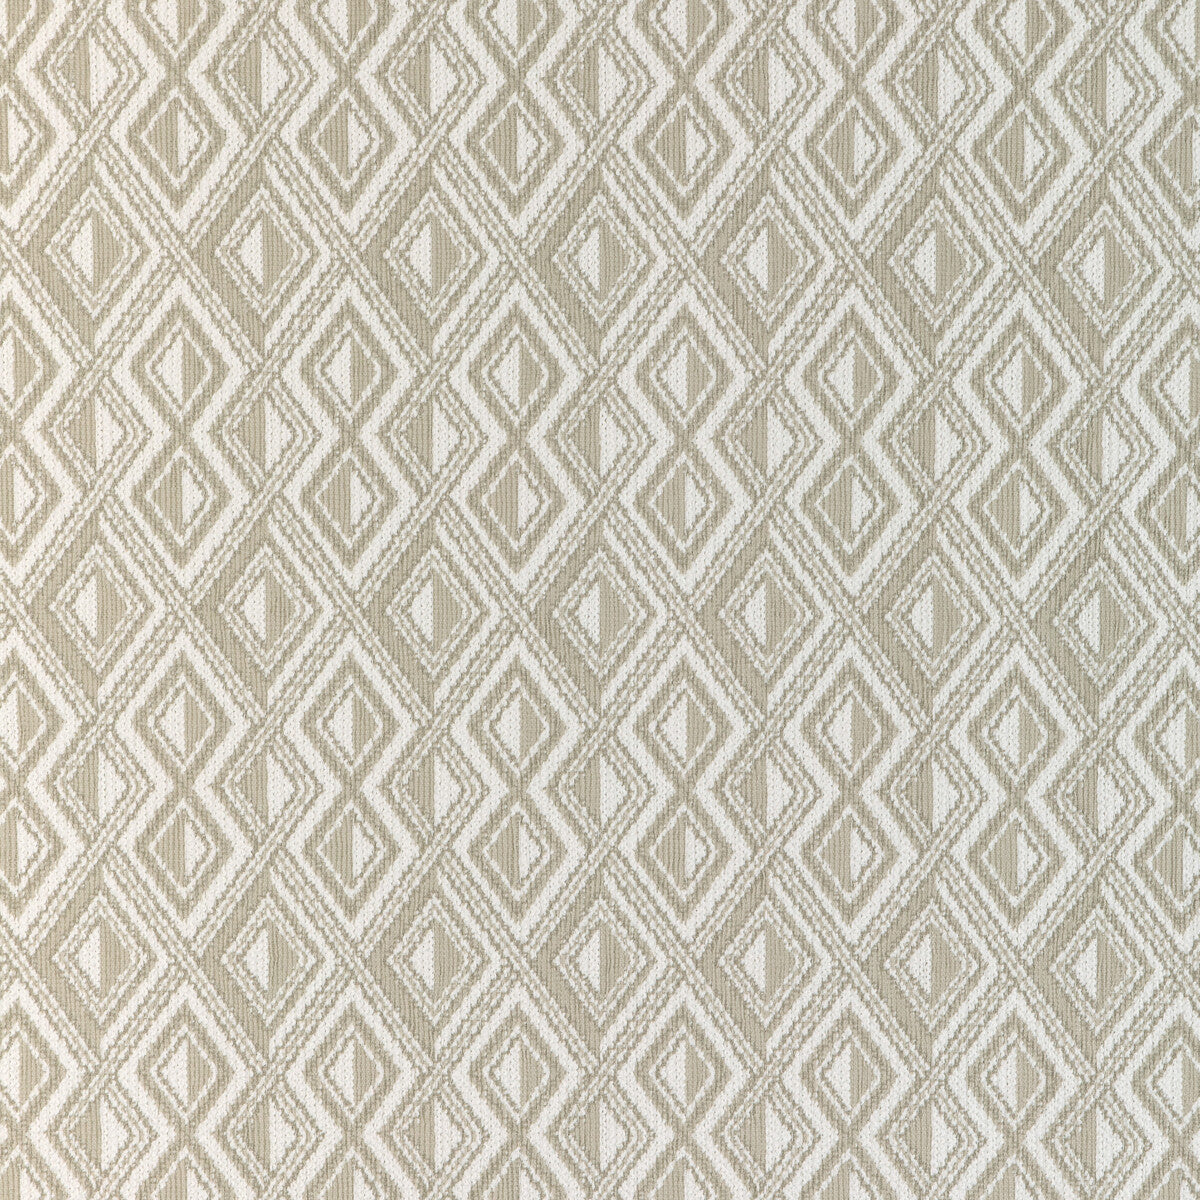 Rough Cut fabric in taupe color - pattern 37058.106.0 - by Kravet Design in the Thom Filicia Latitude collection